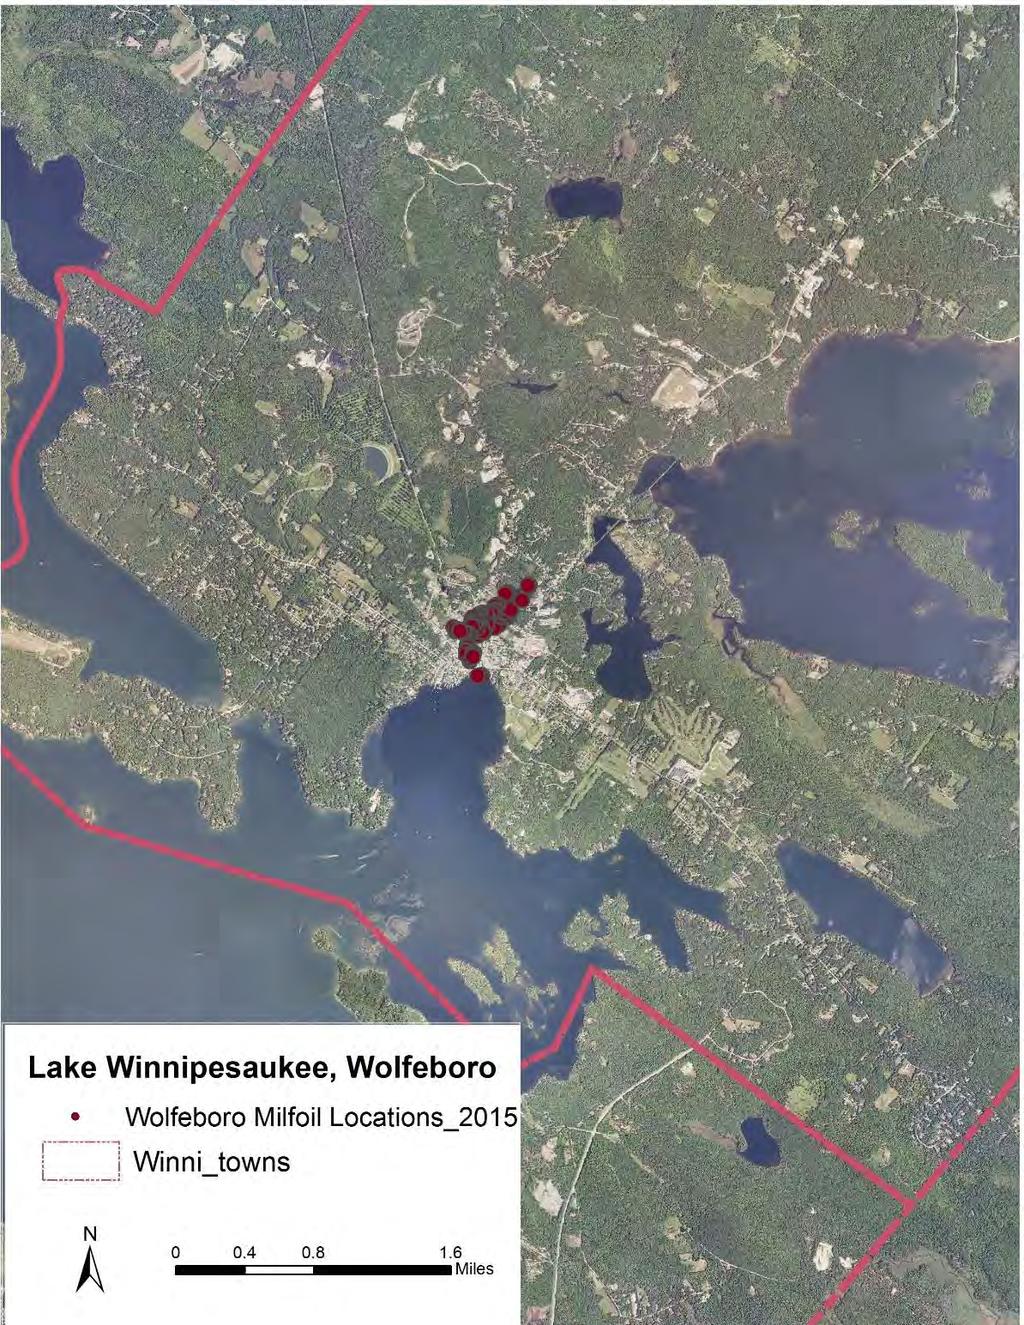 Expenditures The Town of Wolfeboro New Hampshire has budgeted $38,700 for diver activities and